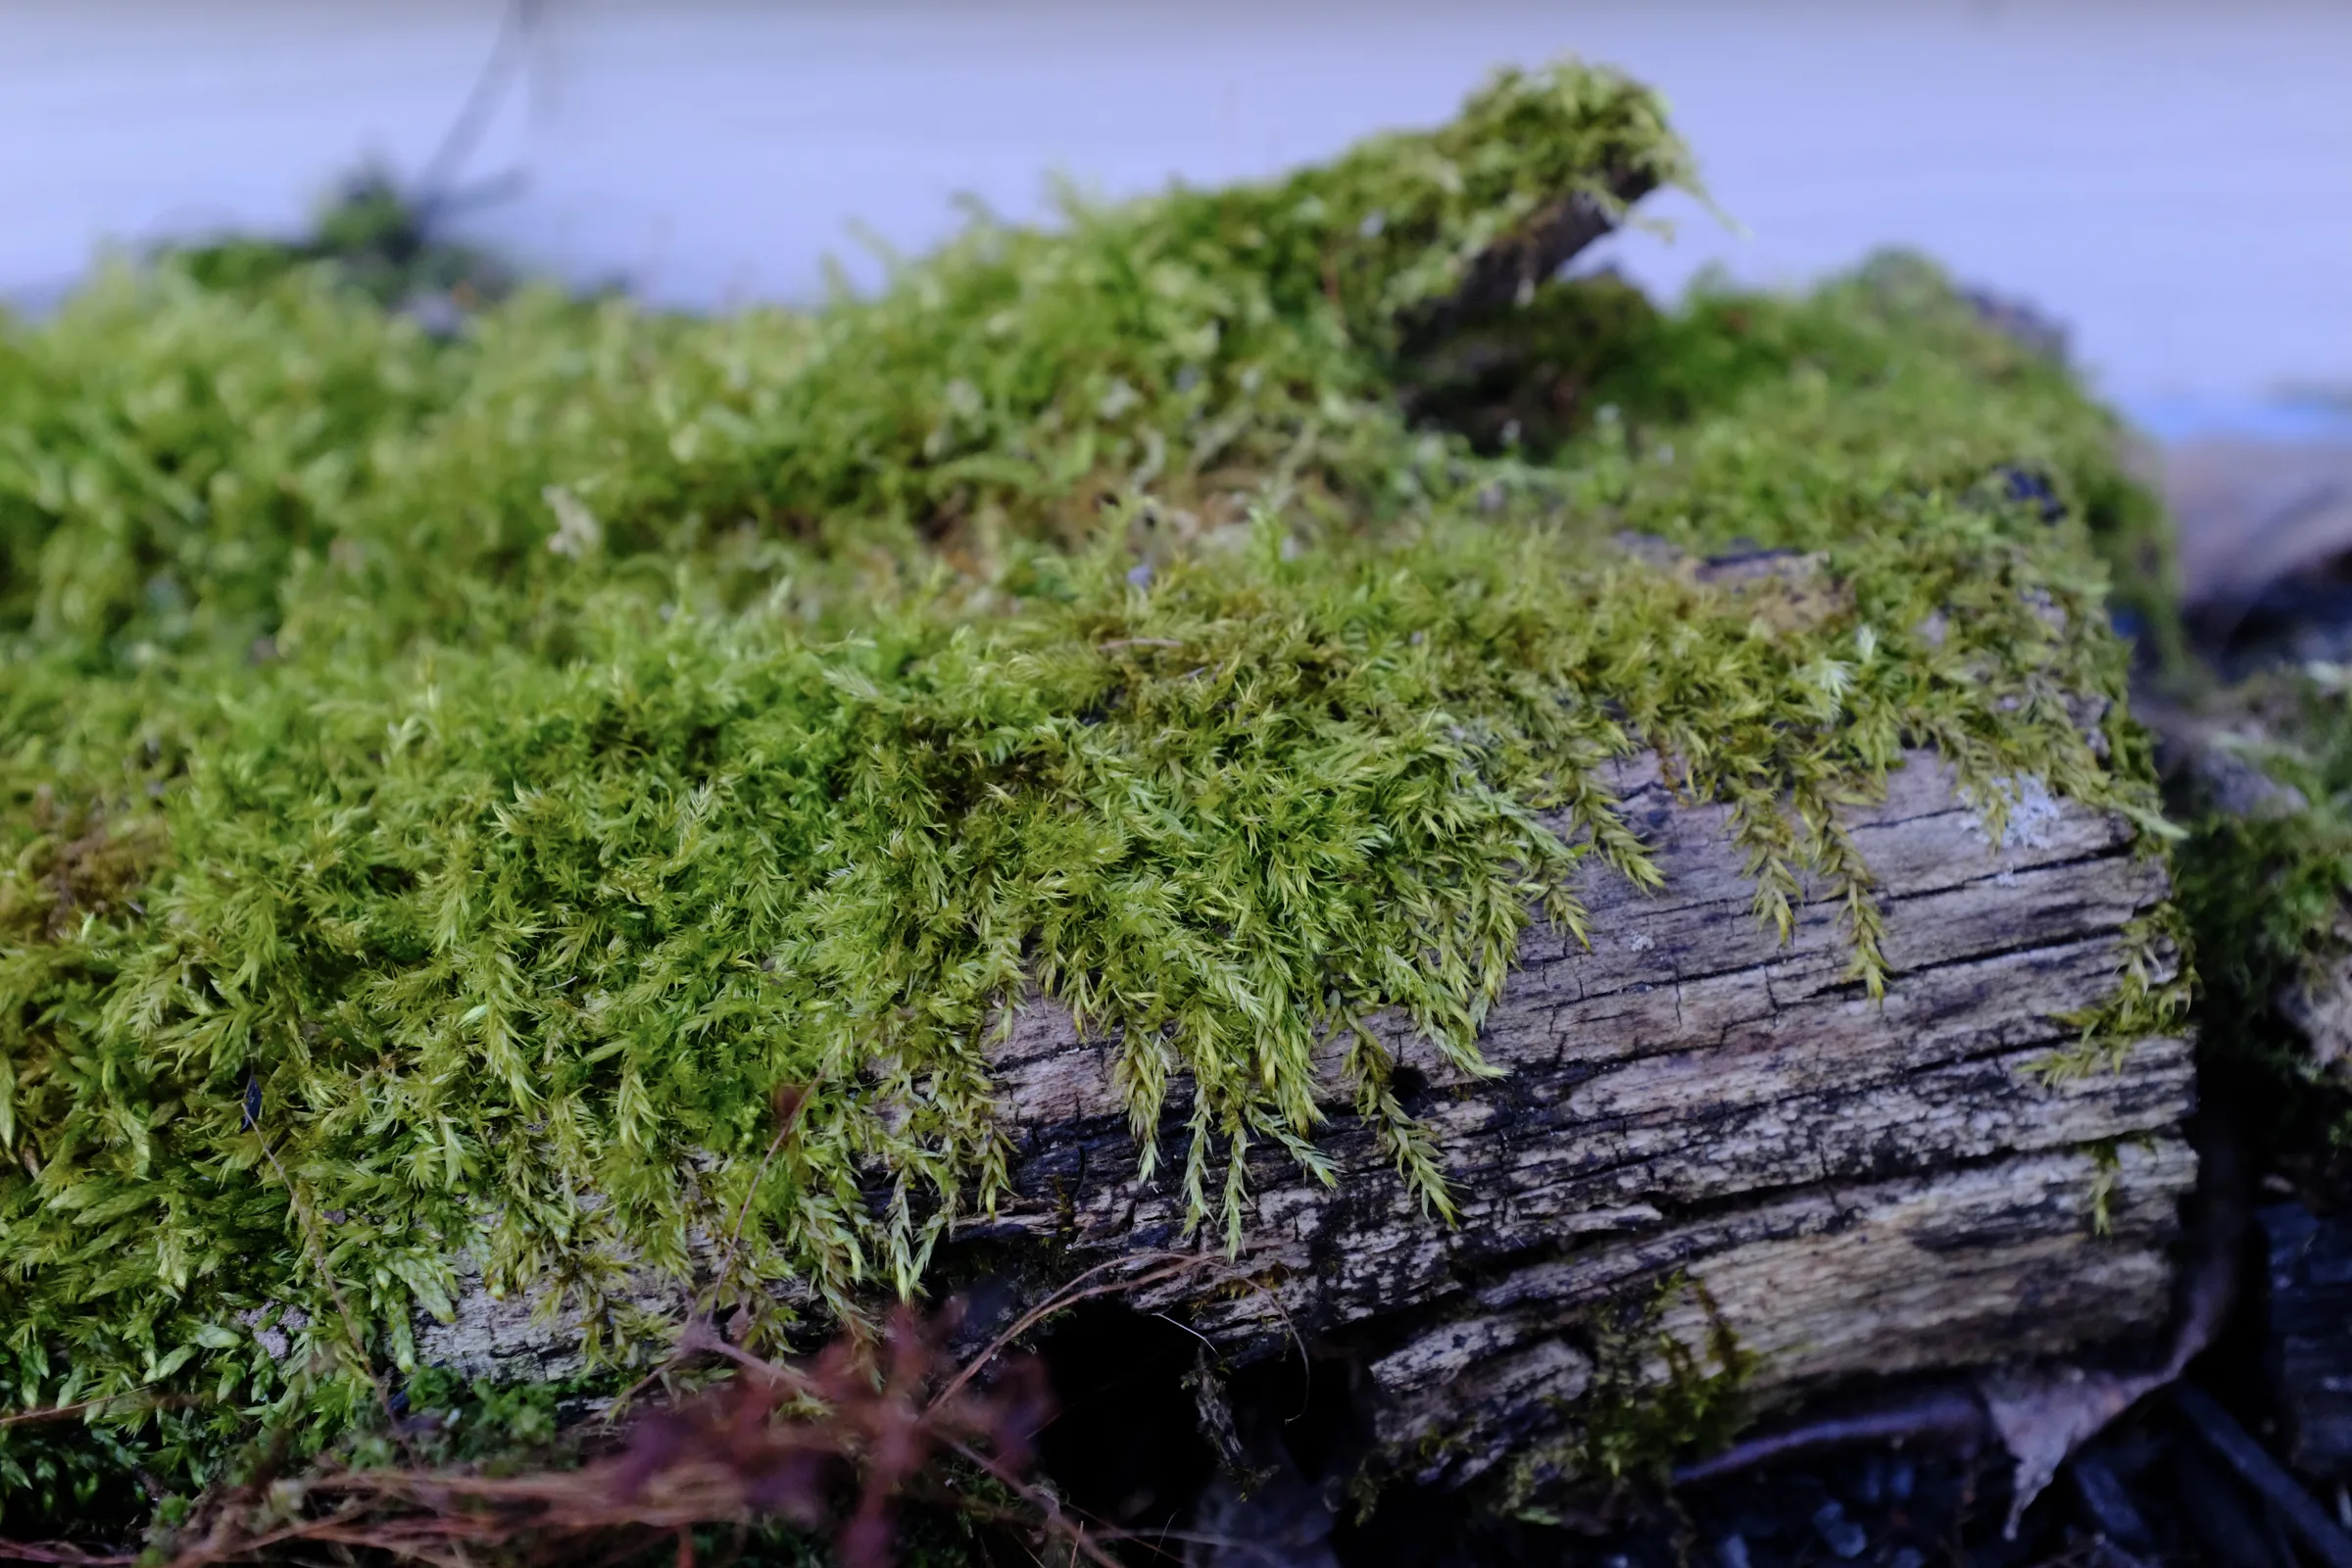 Thick, bright green moss covers a wooden log.